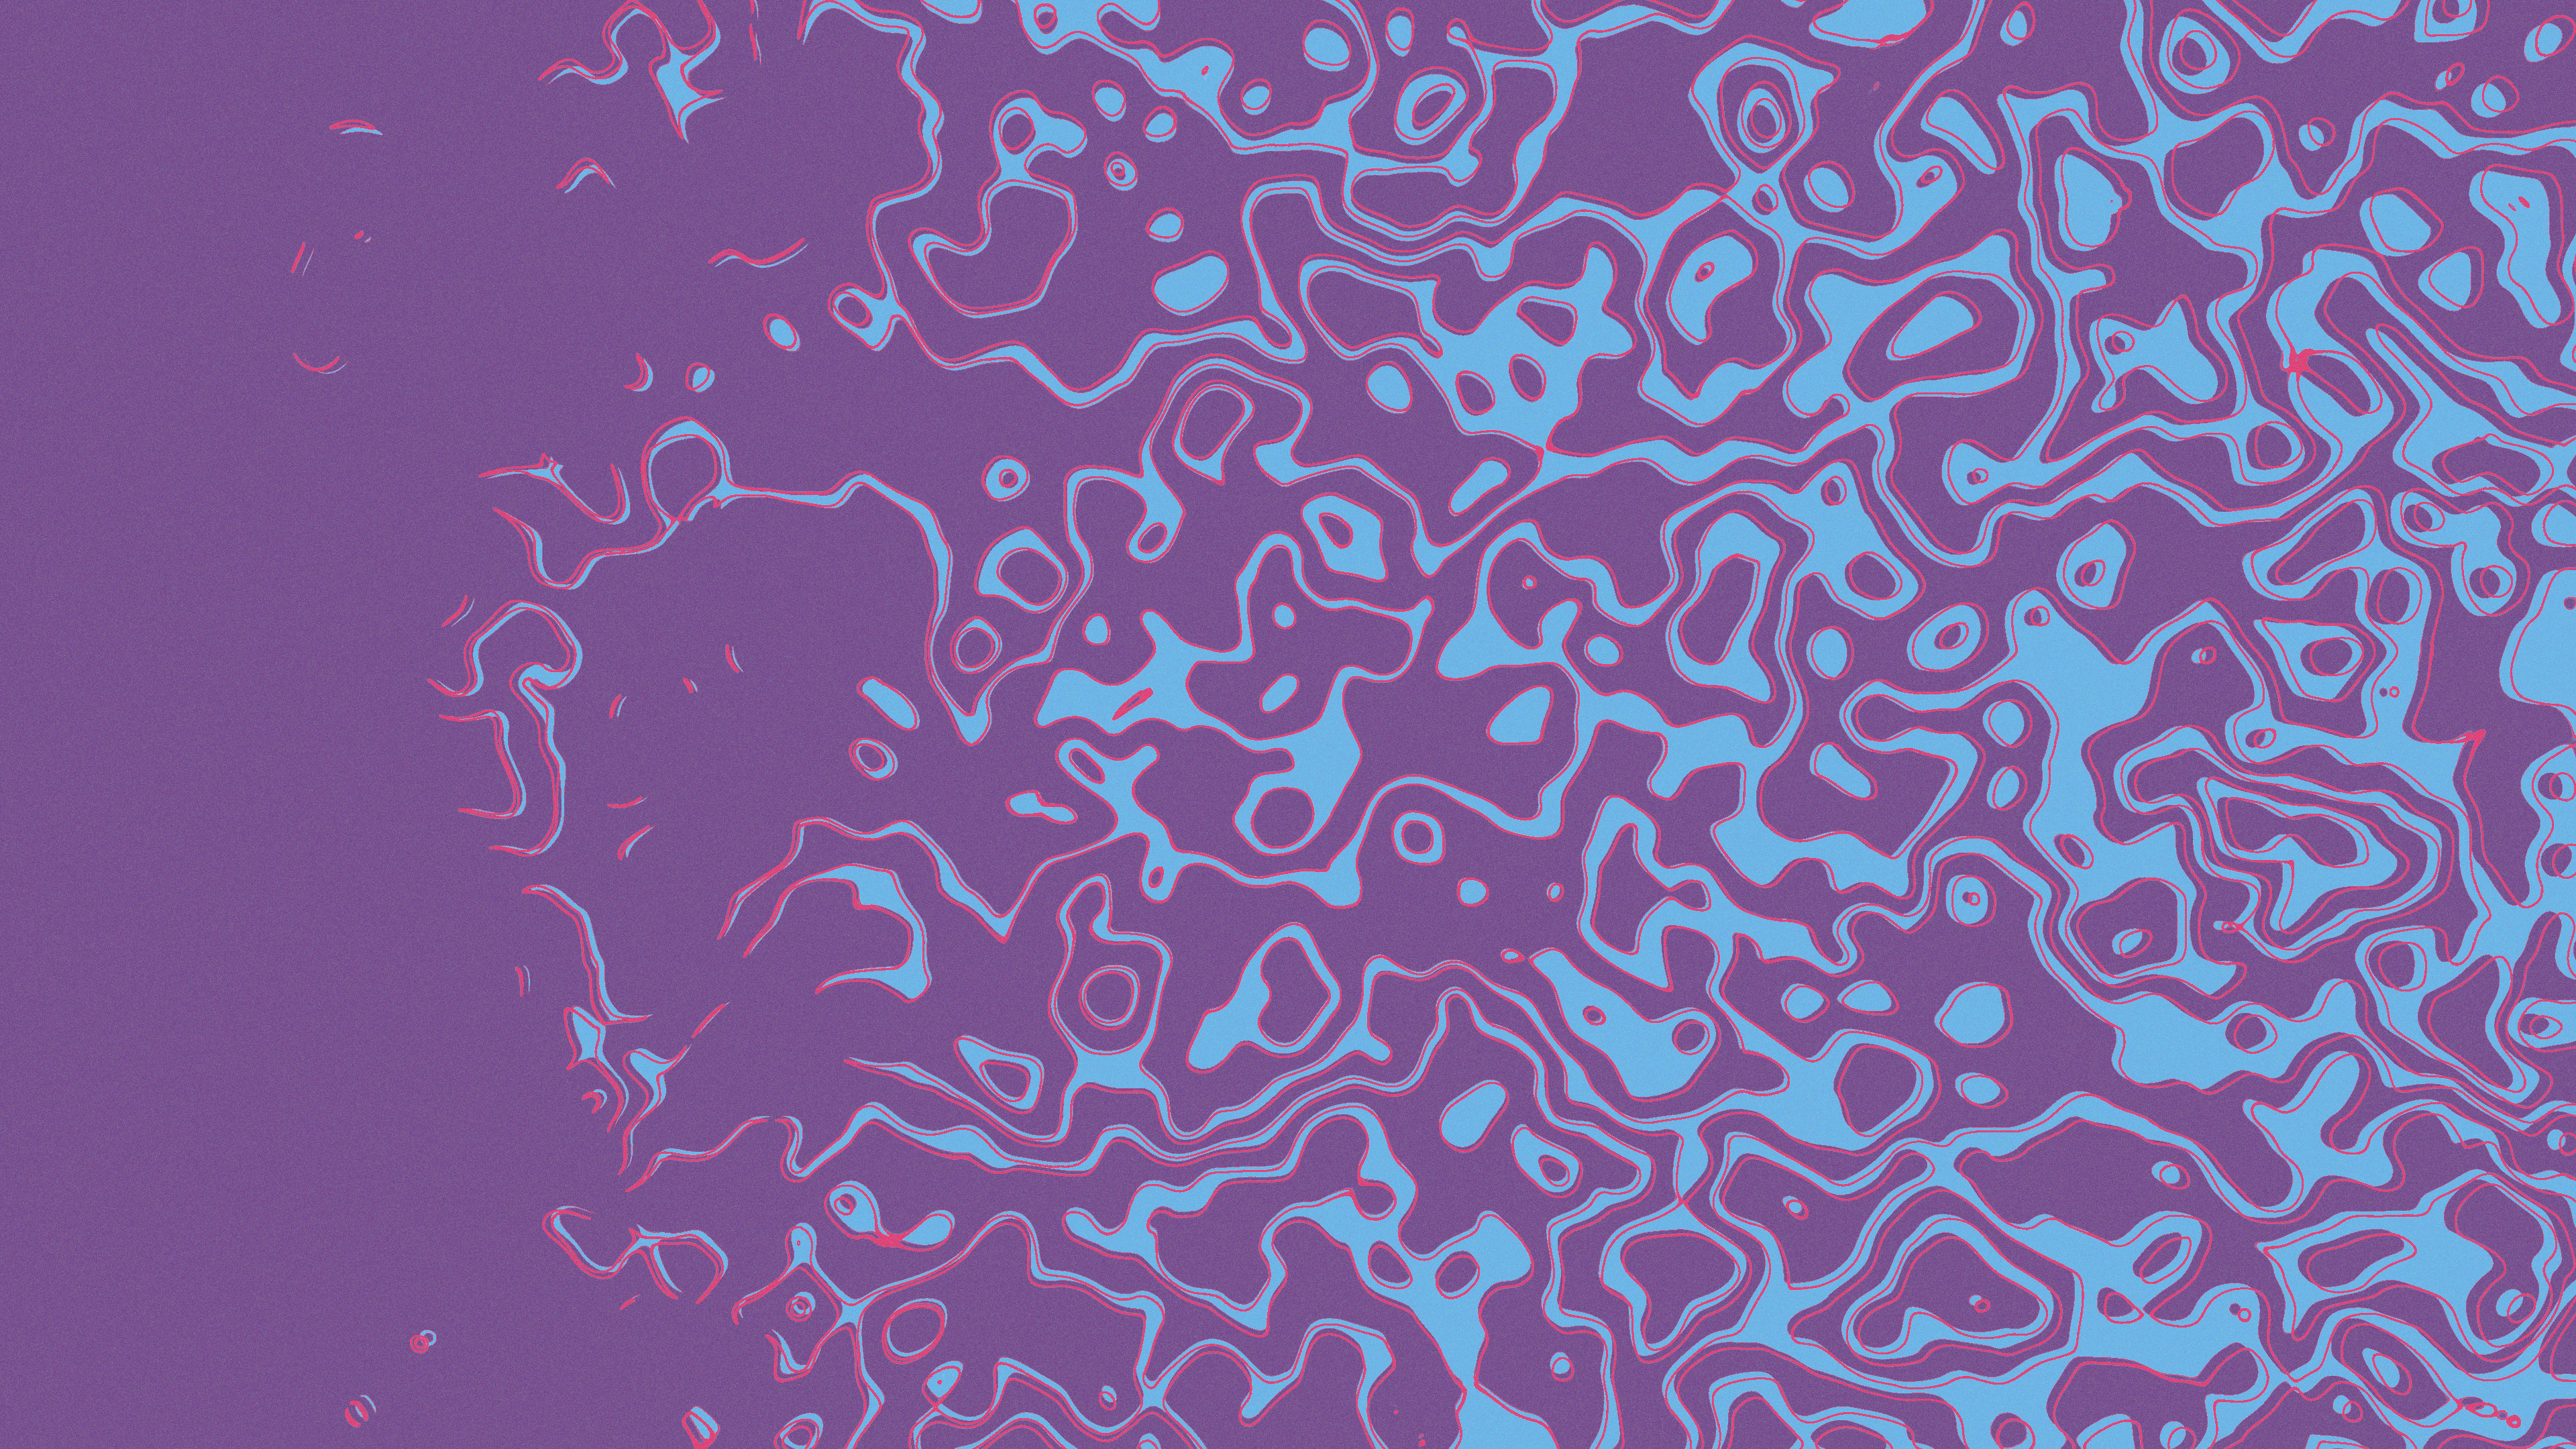 Stash_Squiggles_Styleframe_20